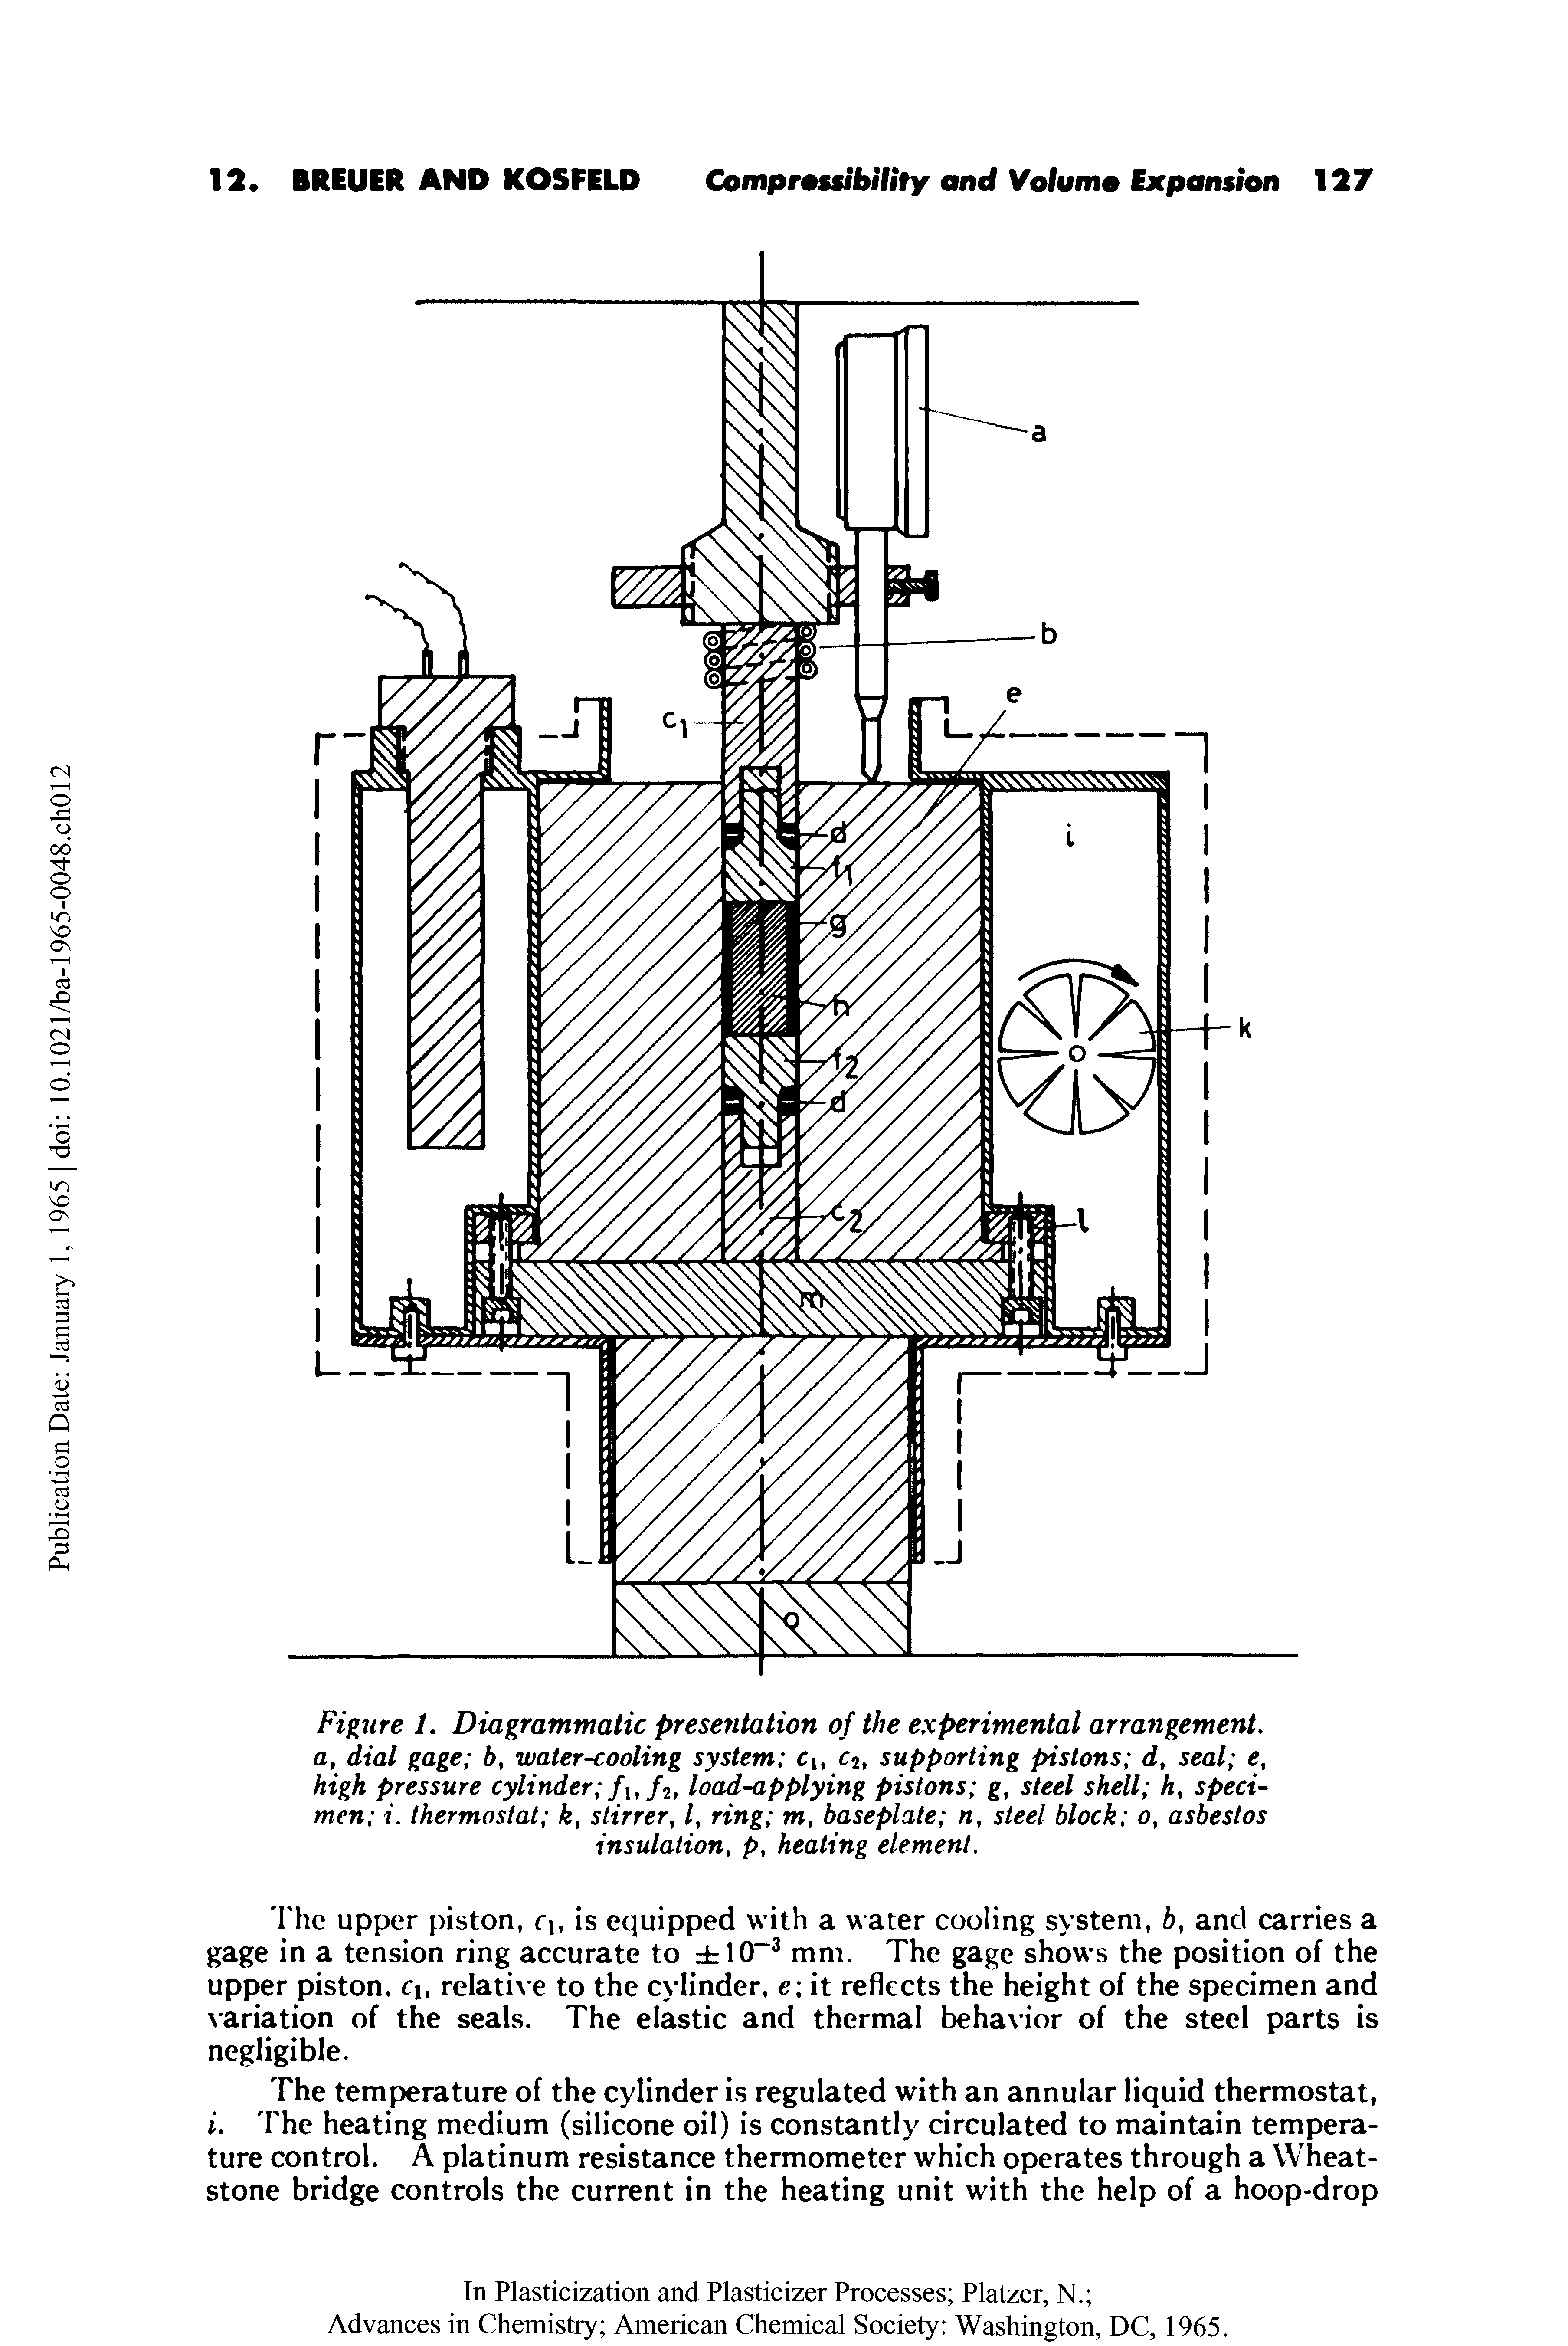 Figure 1. Diagrammatic presentation of the experimental arrangement, a, dial gage h, water-cooling system clt c2 supporting pistons d, seal e, high pressure cylinder /i,/2, load-applying pistons g, steel shell h, specimen i. thermostat k, stirrer, /, ring m, baseplate n, steel block o, asbestos insulation, p, heating element.